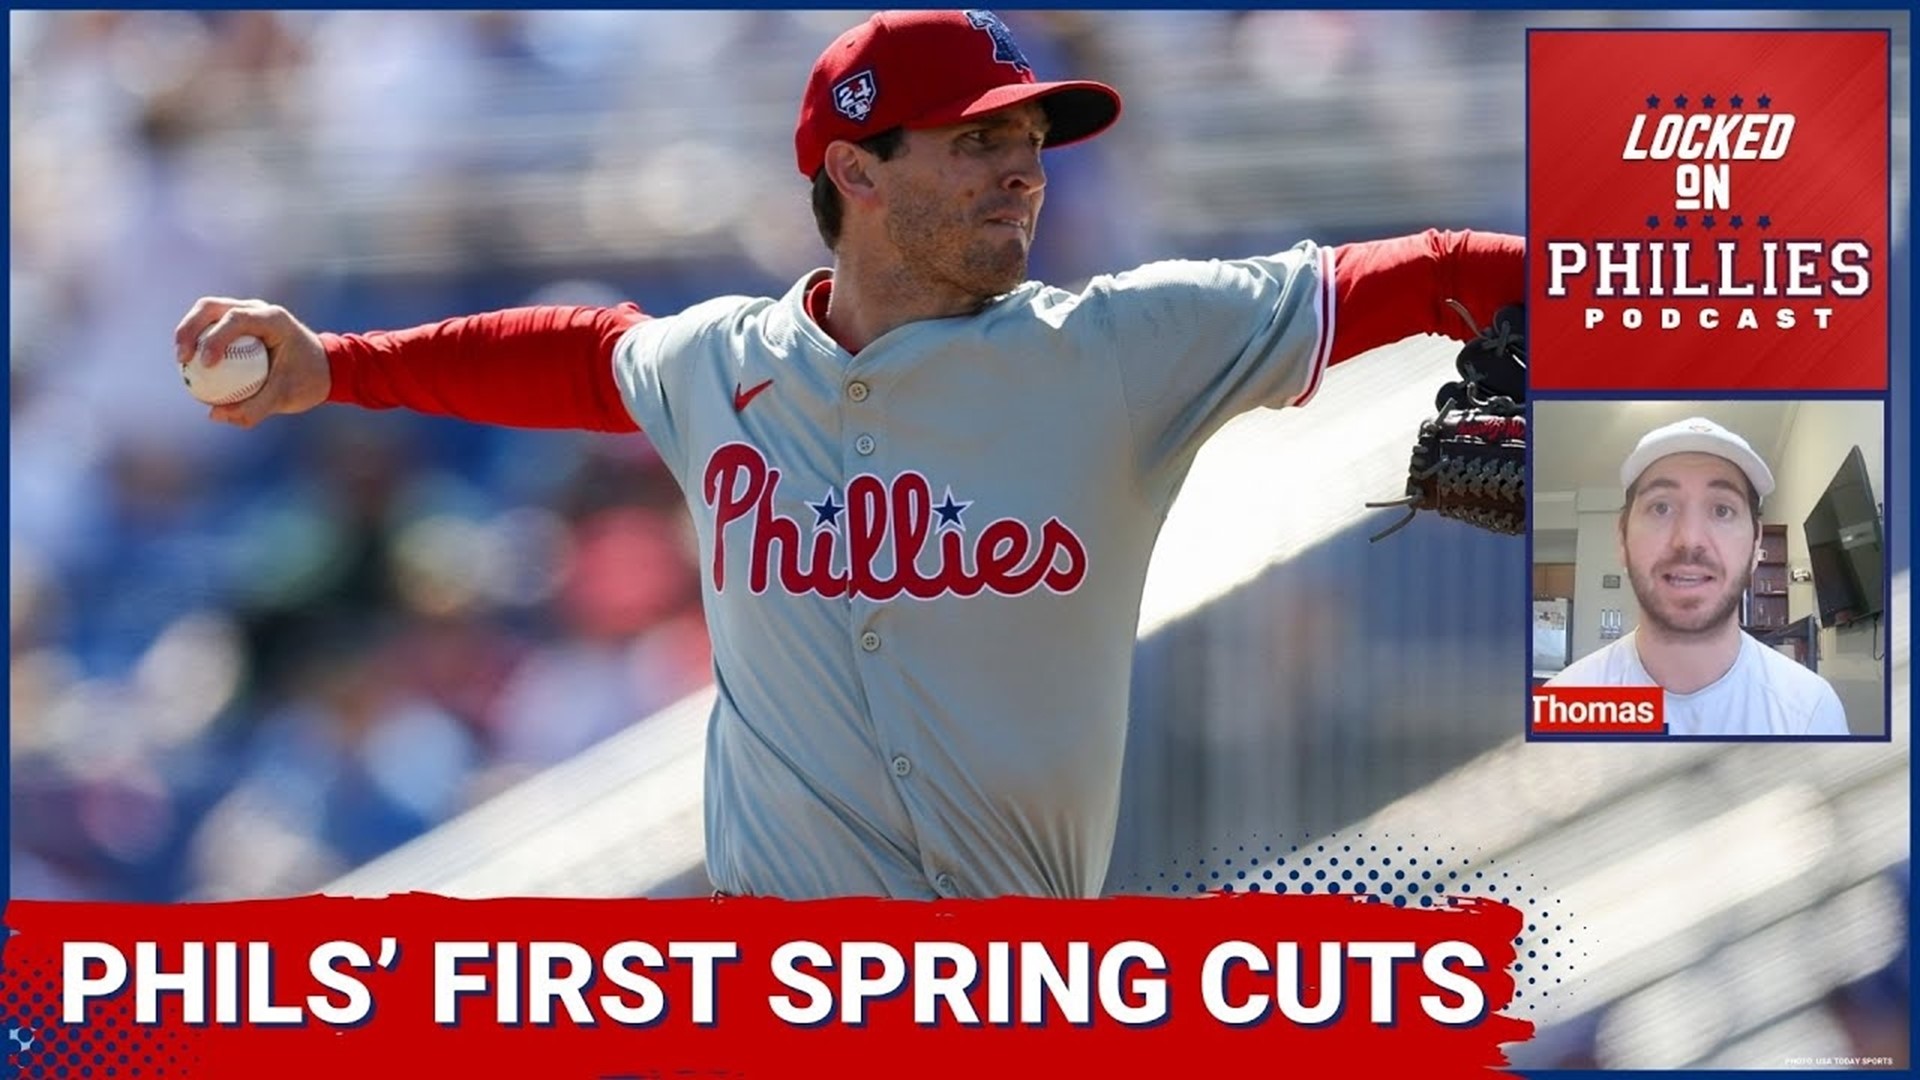 In today's episode, Connor reacts to the Philadelphia Phillies' first Spring Training roster cuts.